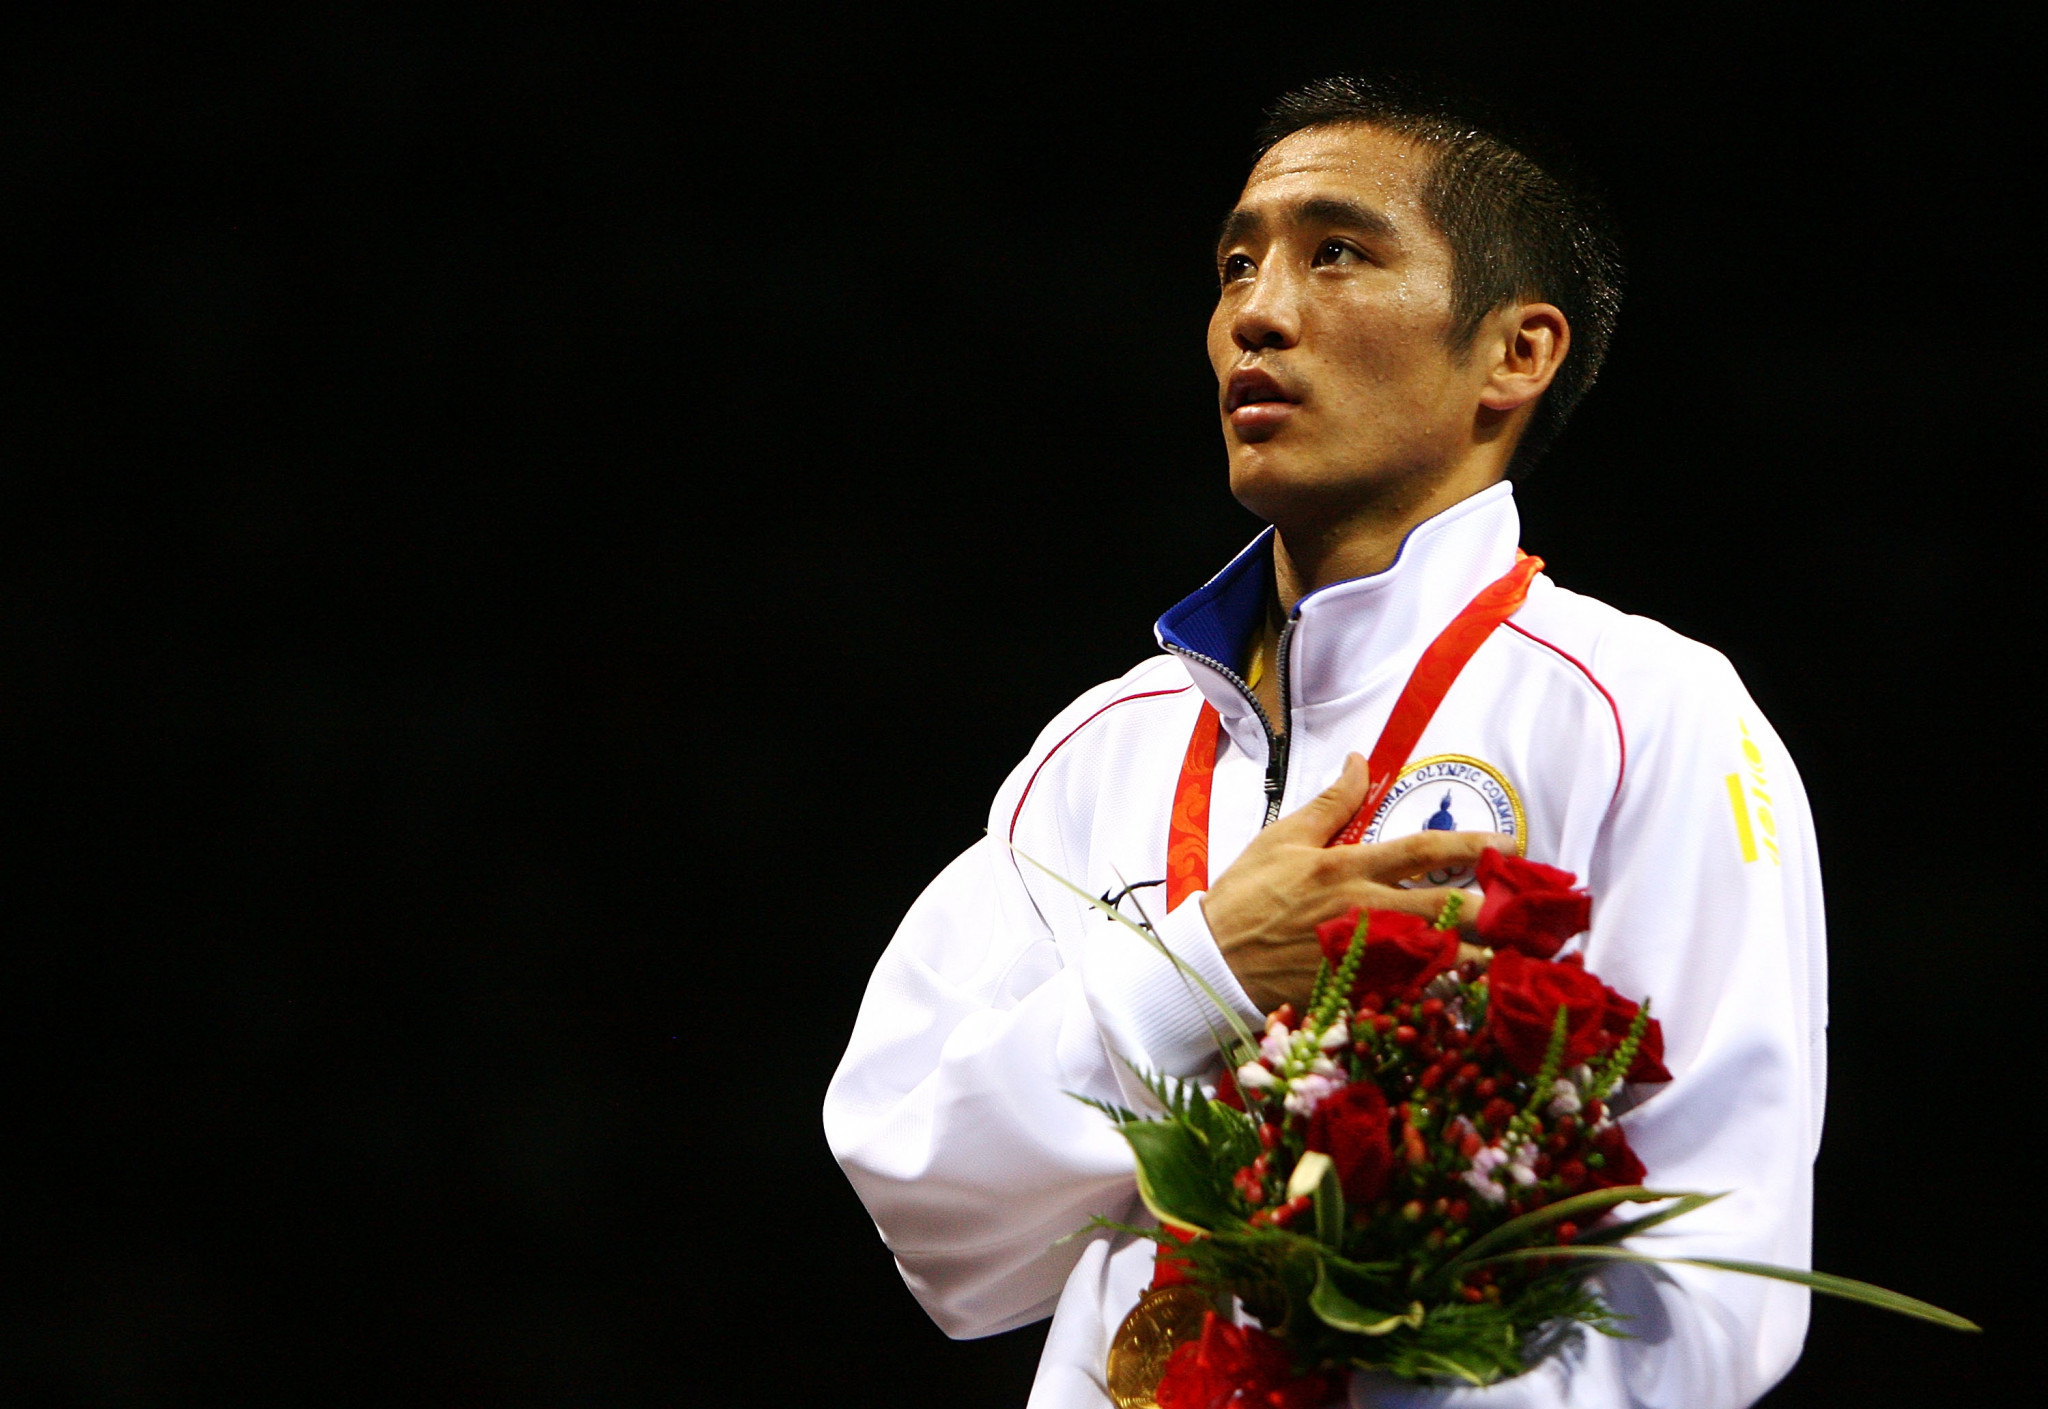 Mongolia's first Olympic gold medallist Enkhbat Badar-Uugan attended the signing ceremony ©Getty Images